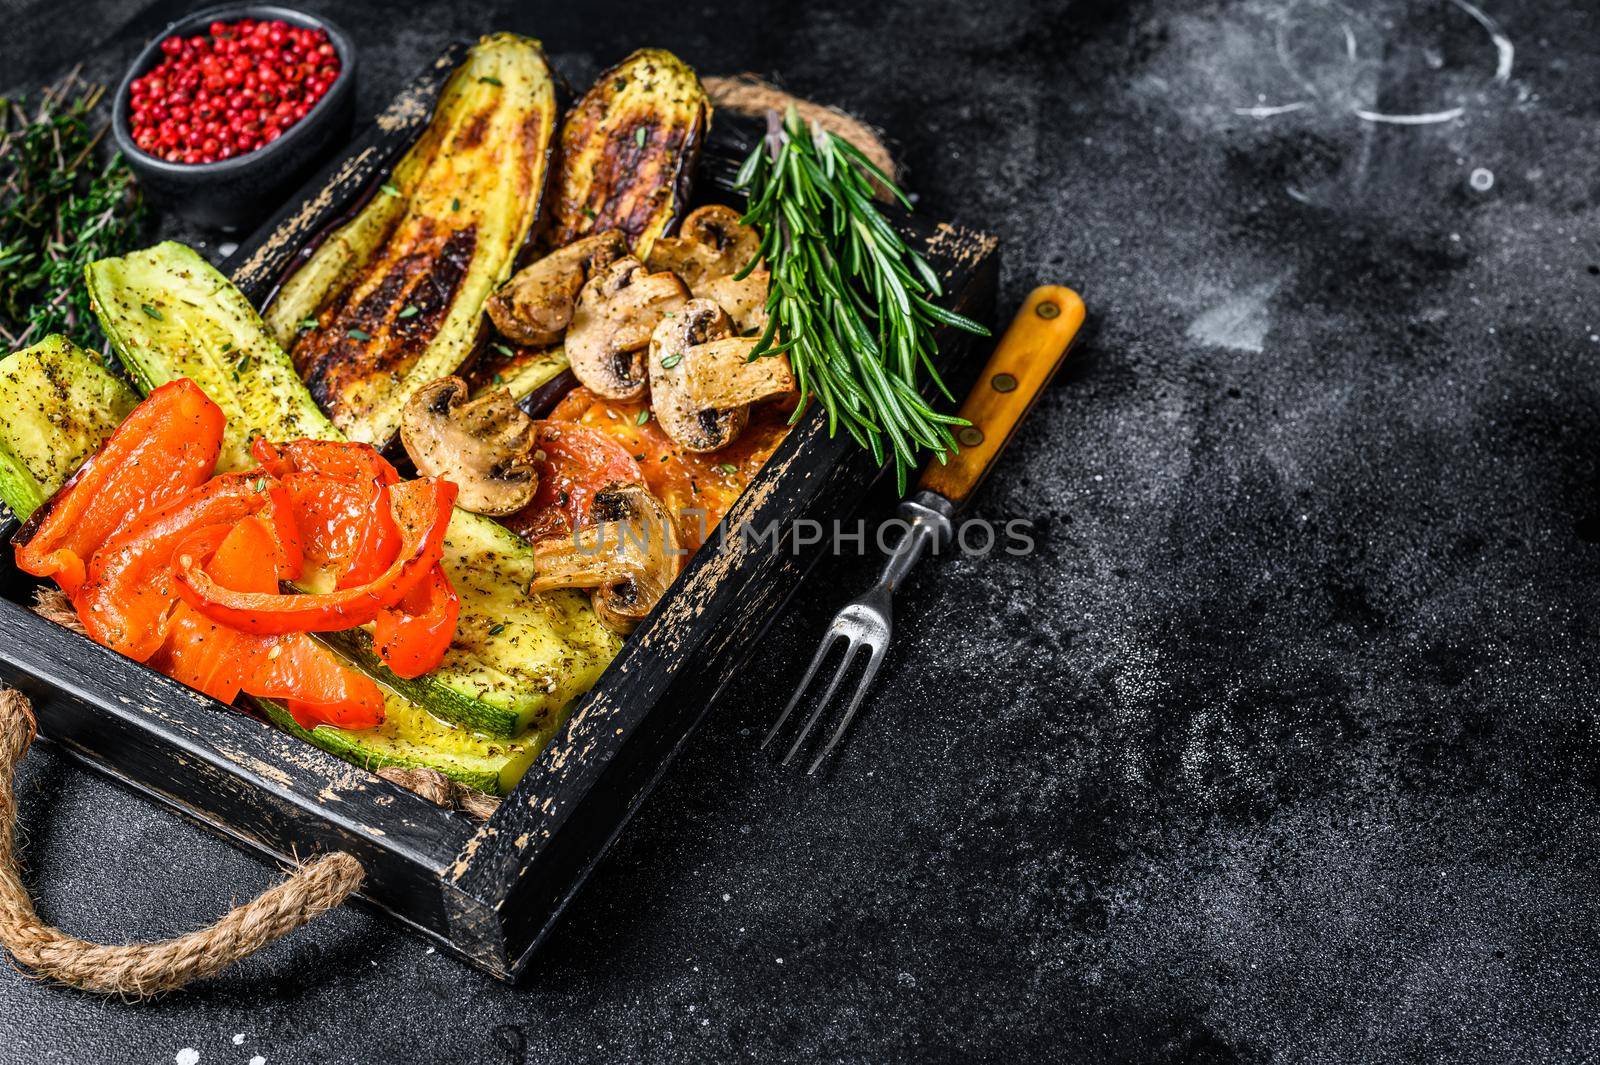 Baked vegetables bell pepper, zucchini, eggplant and tomato in a wooden tray. Black wooden background. Top view. Copy space.